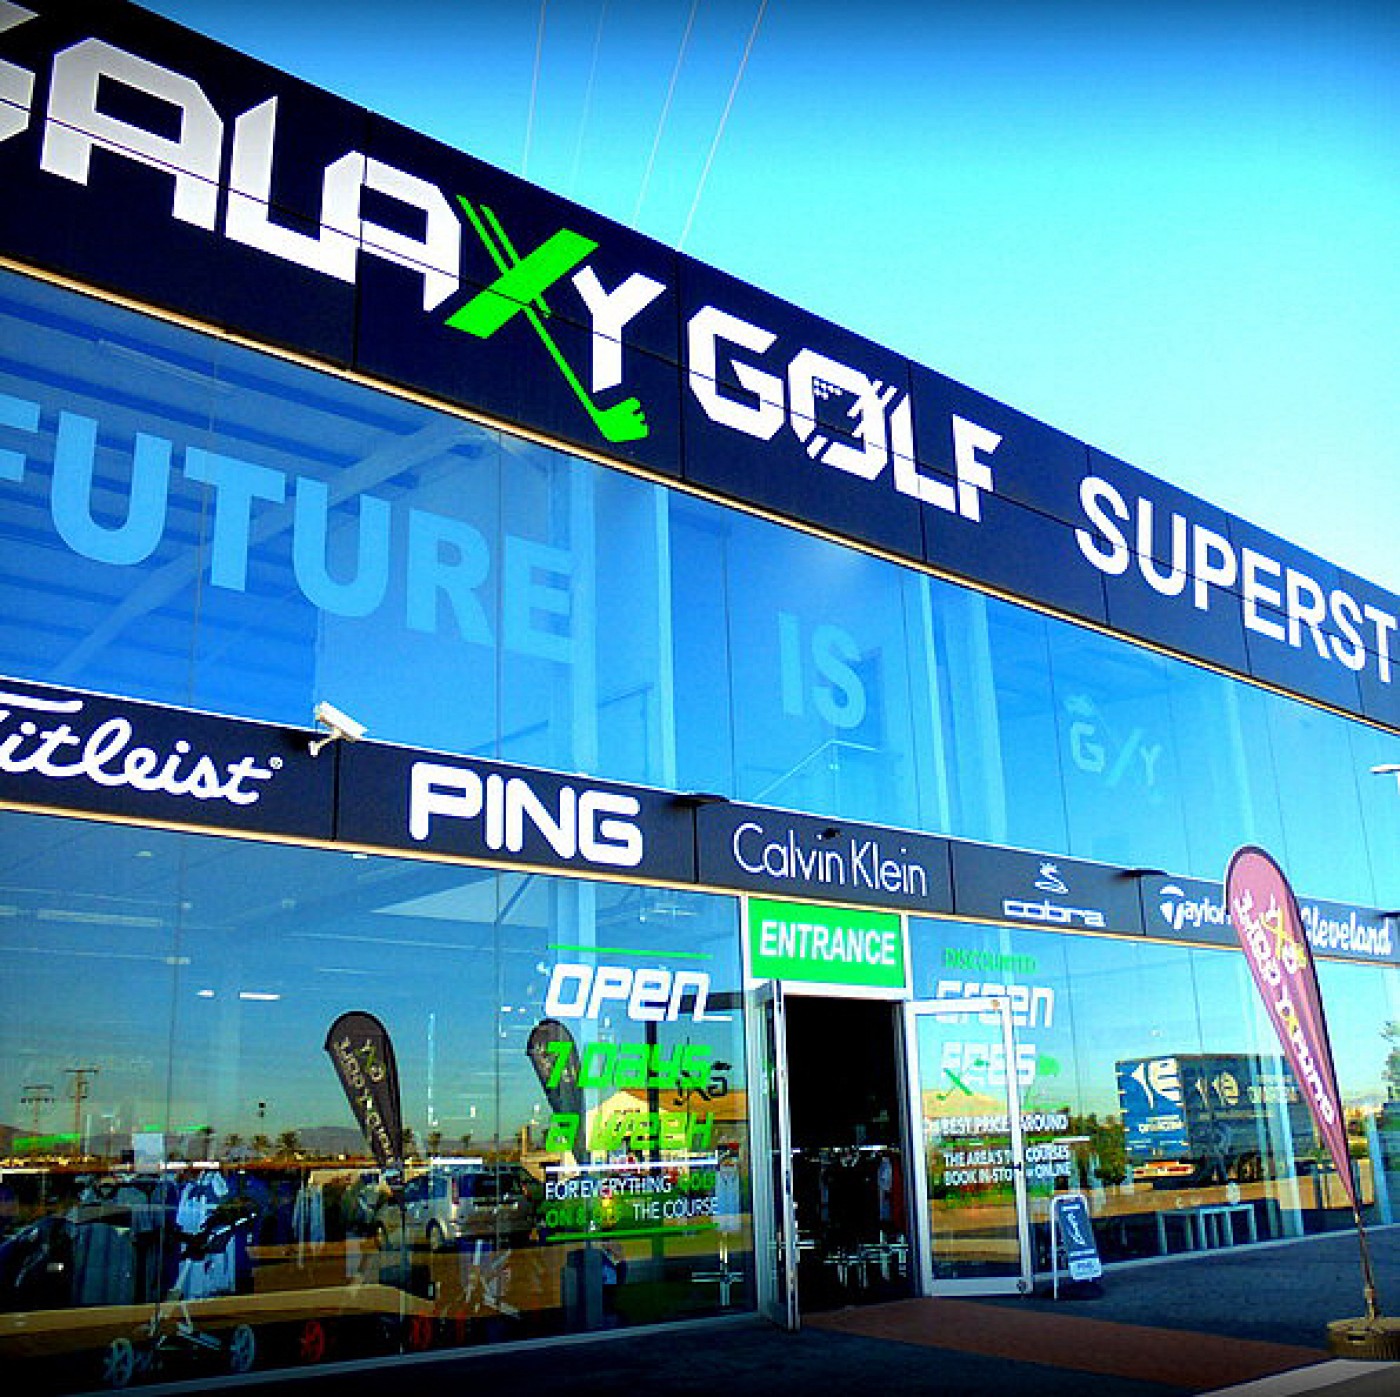 ! Alicante Today Get Ready For Golf This Autumn & Winter At Galaxy